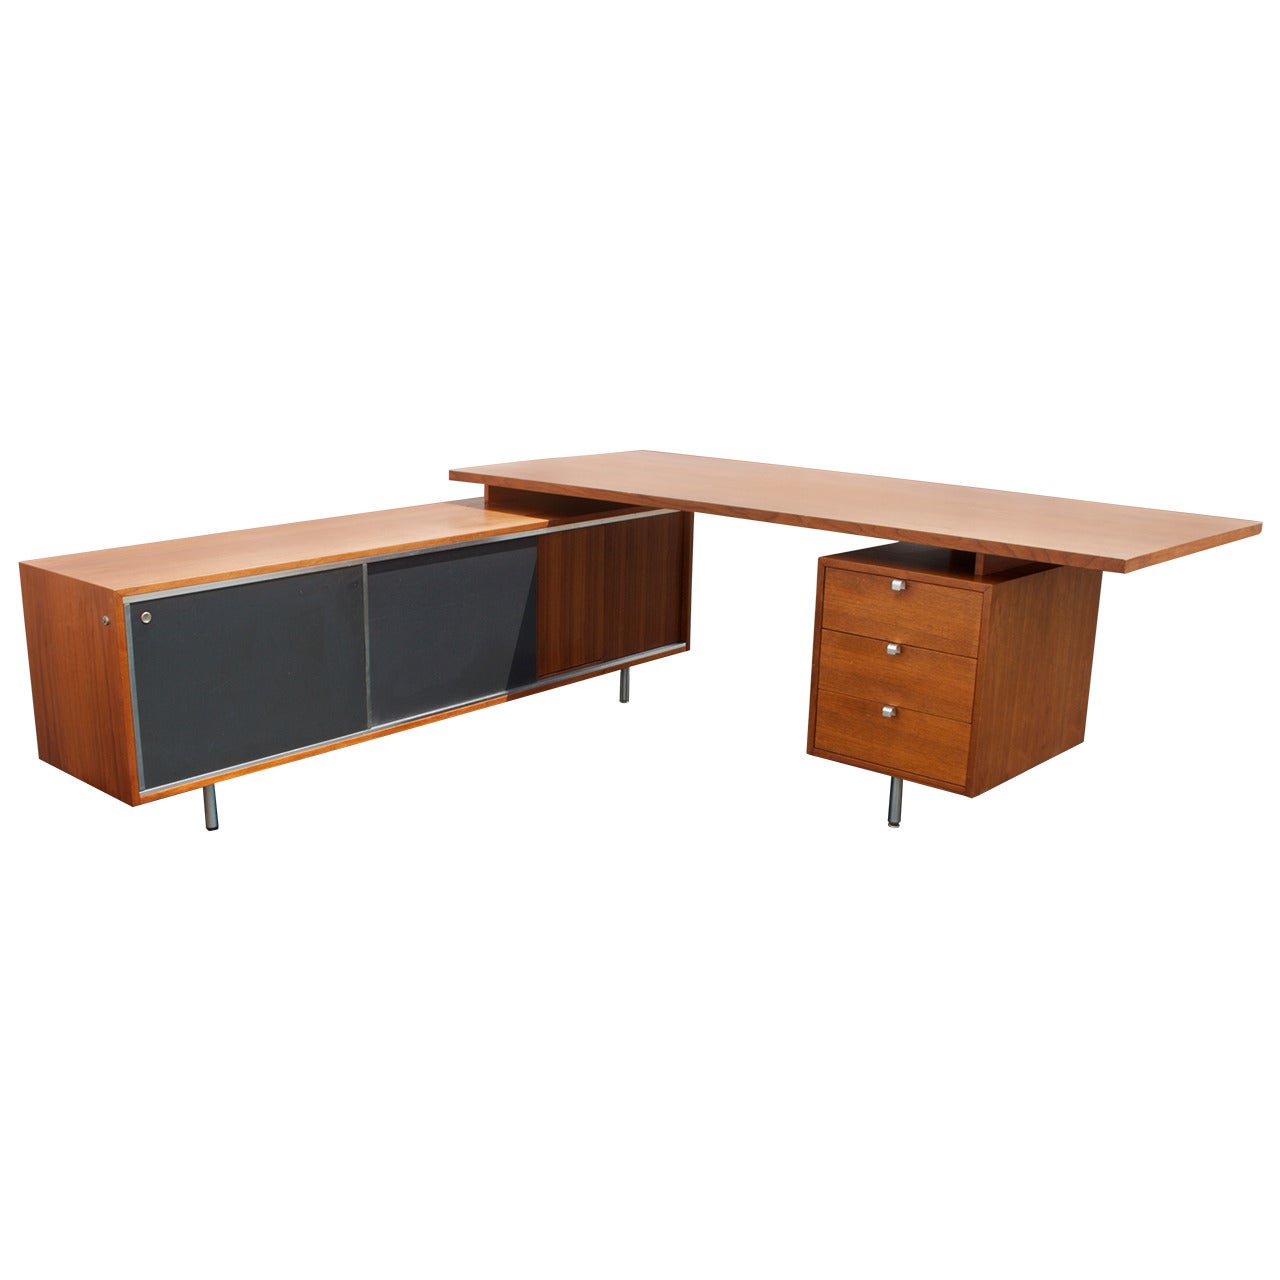 George Nelson for Herman Miller, Executive Desk with Return Credenza